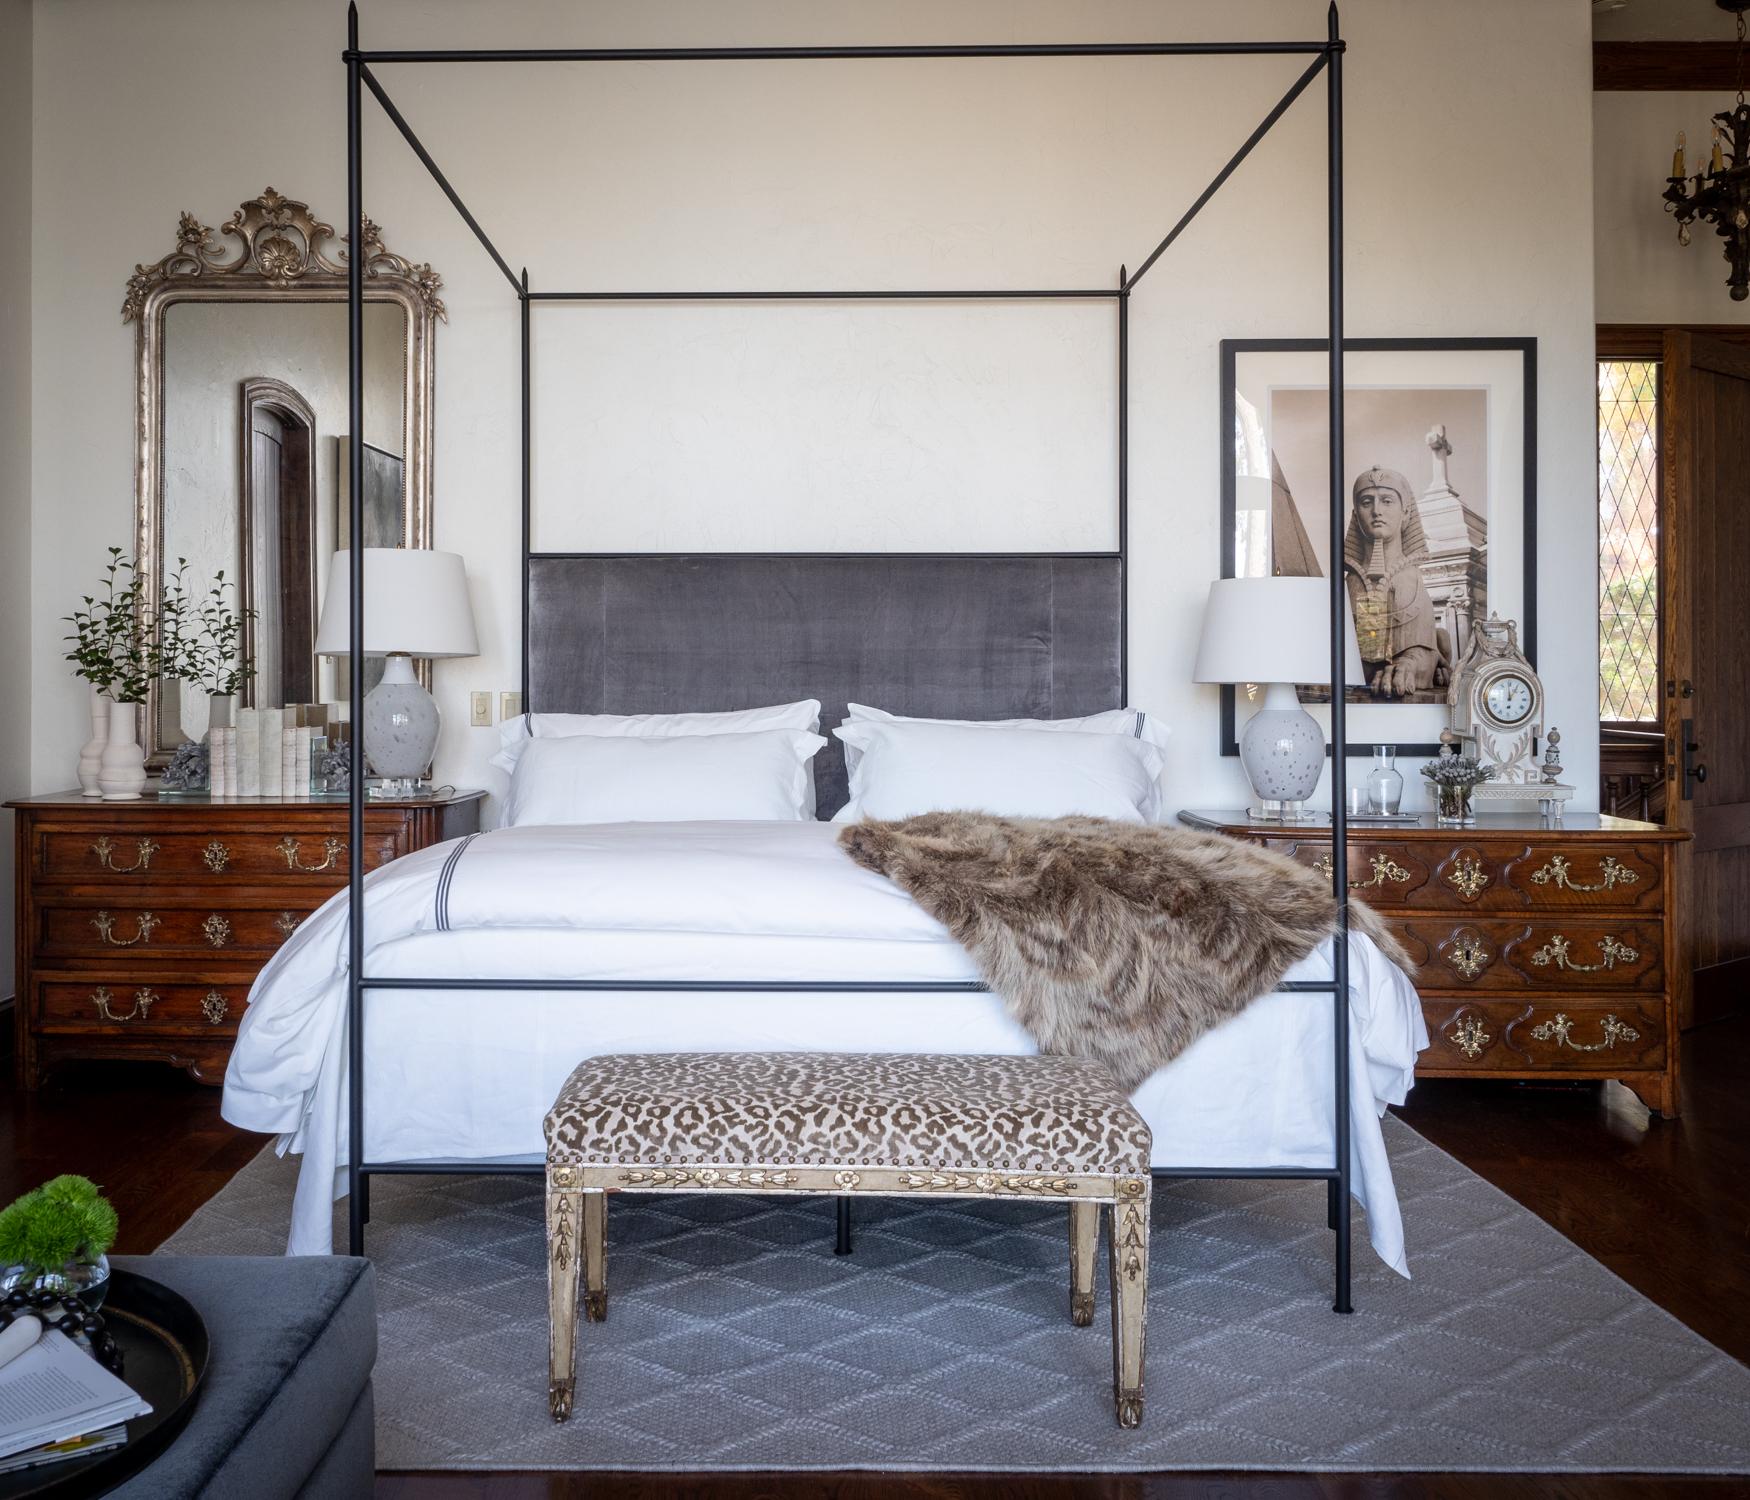 This Louis XVI style canopy bed with upholstered headboard from the custom Tara Shaw Maison collection. Handcrafted in New Orleans. Standard headboard upholstered in a oyster heavyweight Belgian linen. Available in king, calking, queen and twin